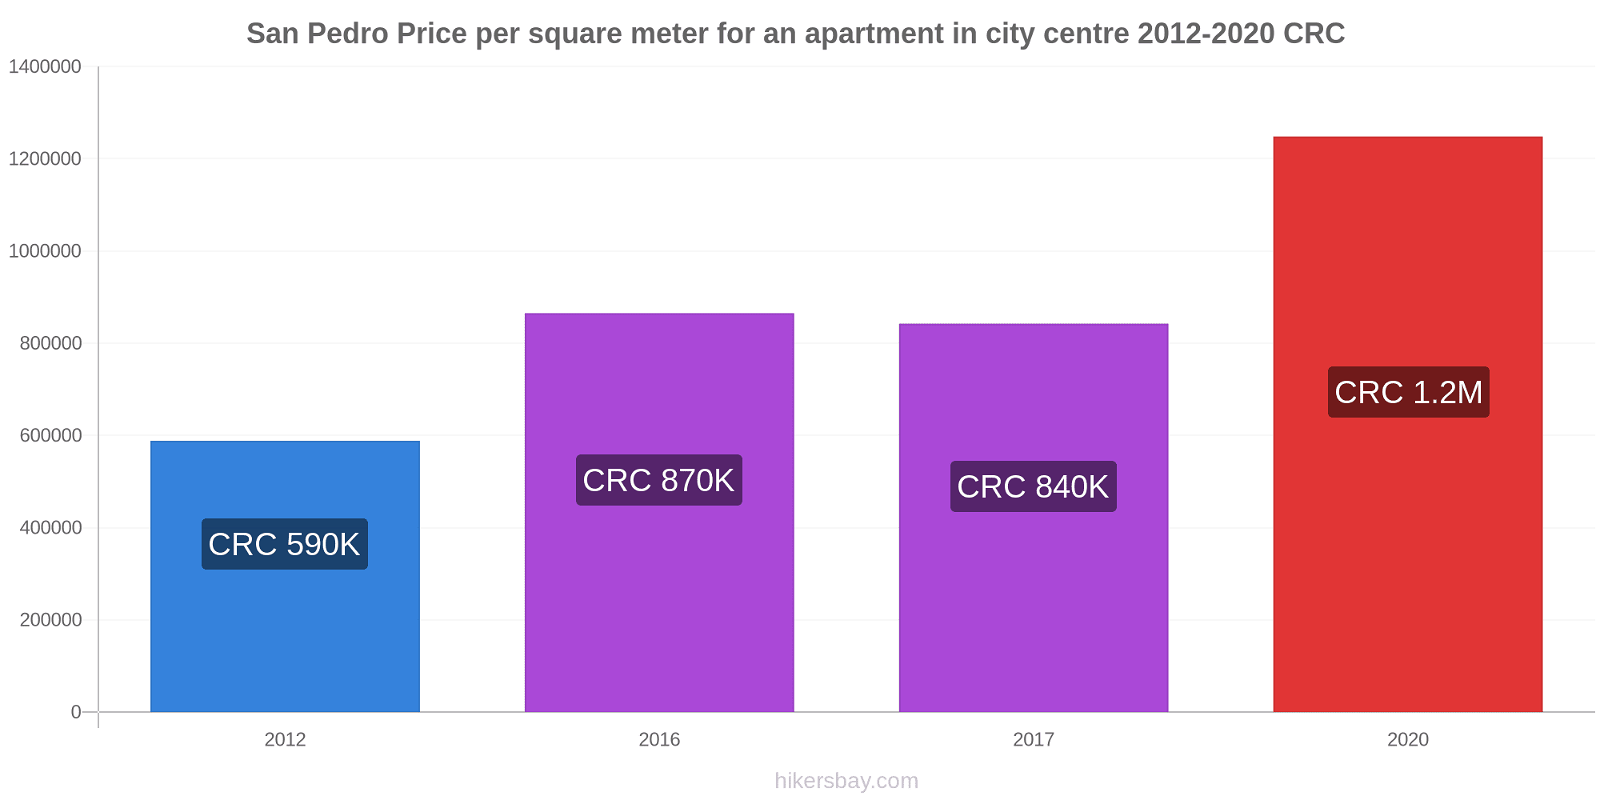 San Pedro price changes Price per square meter for an apartment in city centre hikersbay.com